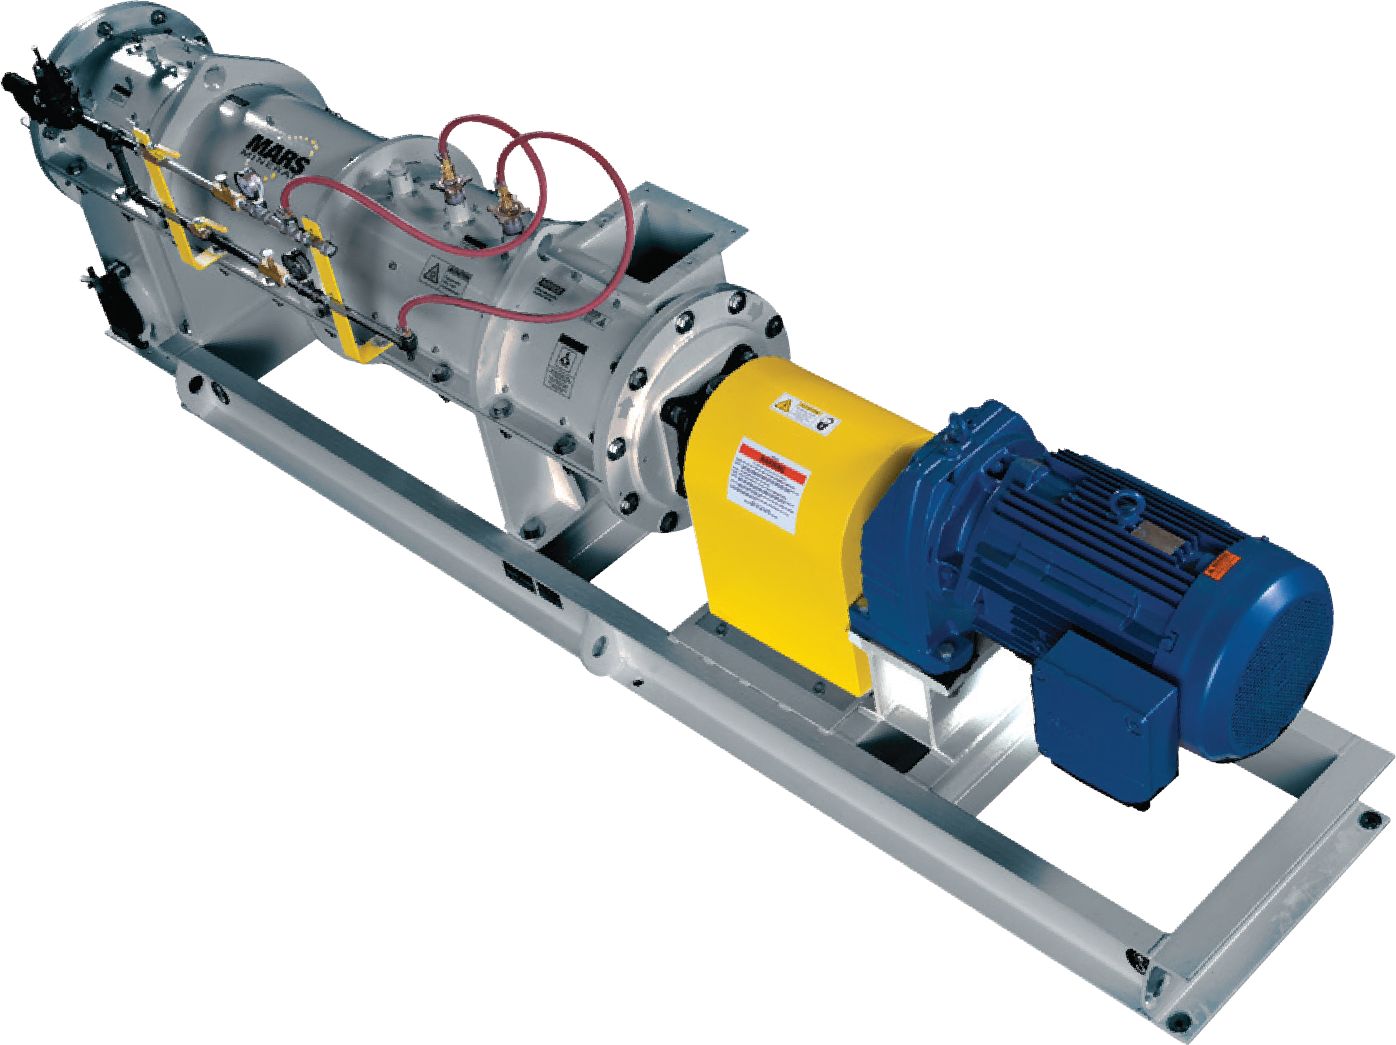 Mars Mineral Pin Mixer is a micro-pelletizing device that converts chicken manure into small agglomerates through the action of a high-speed rotor shaft and pin assembly.